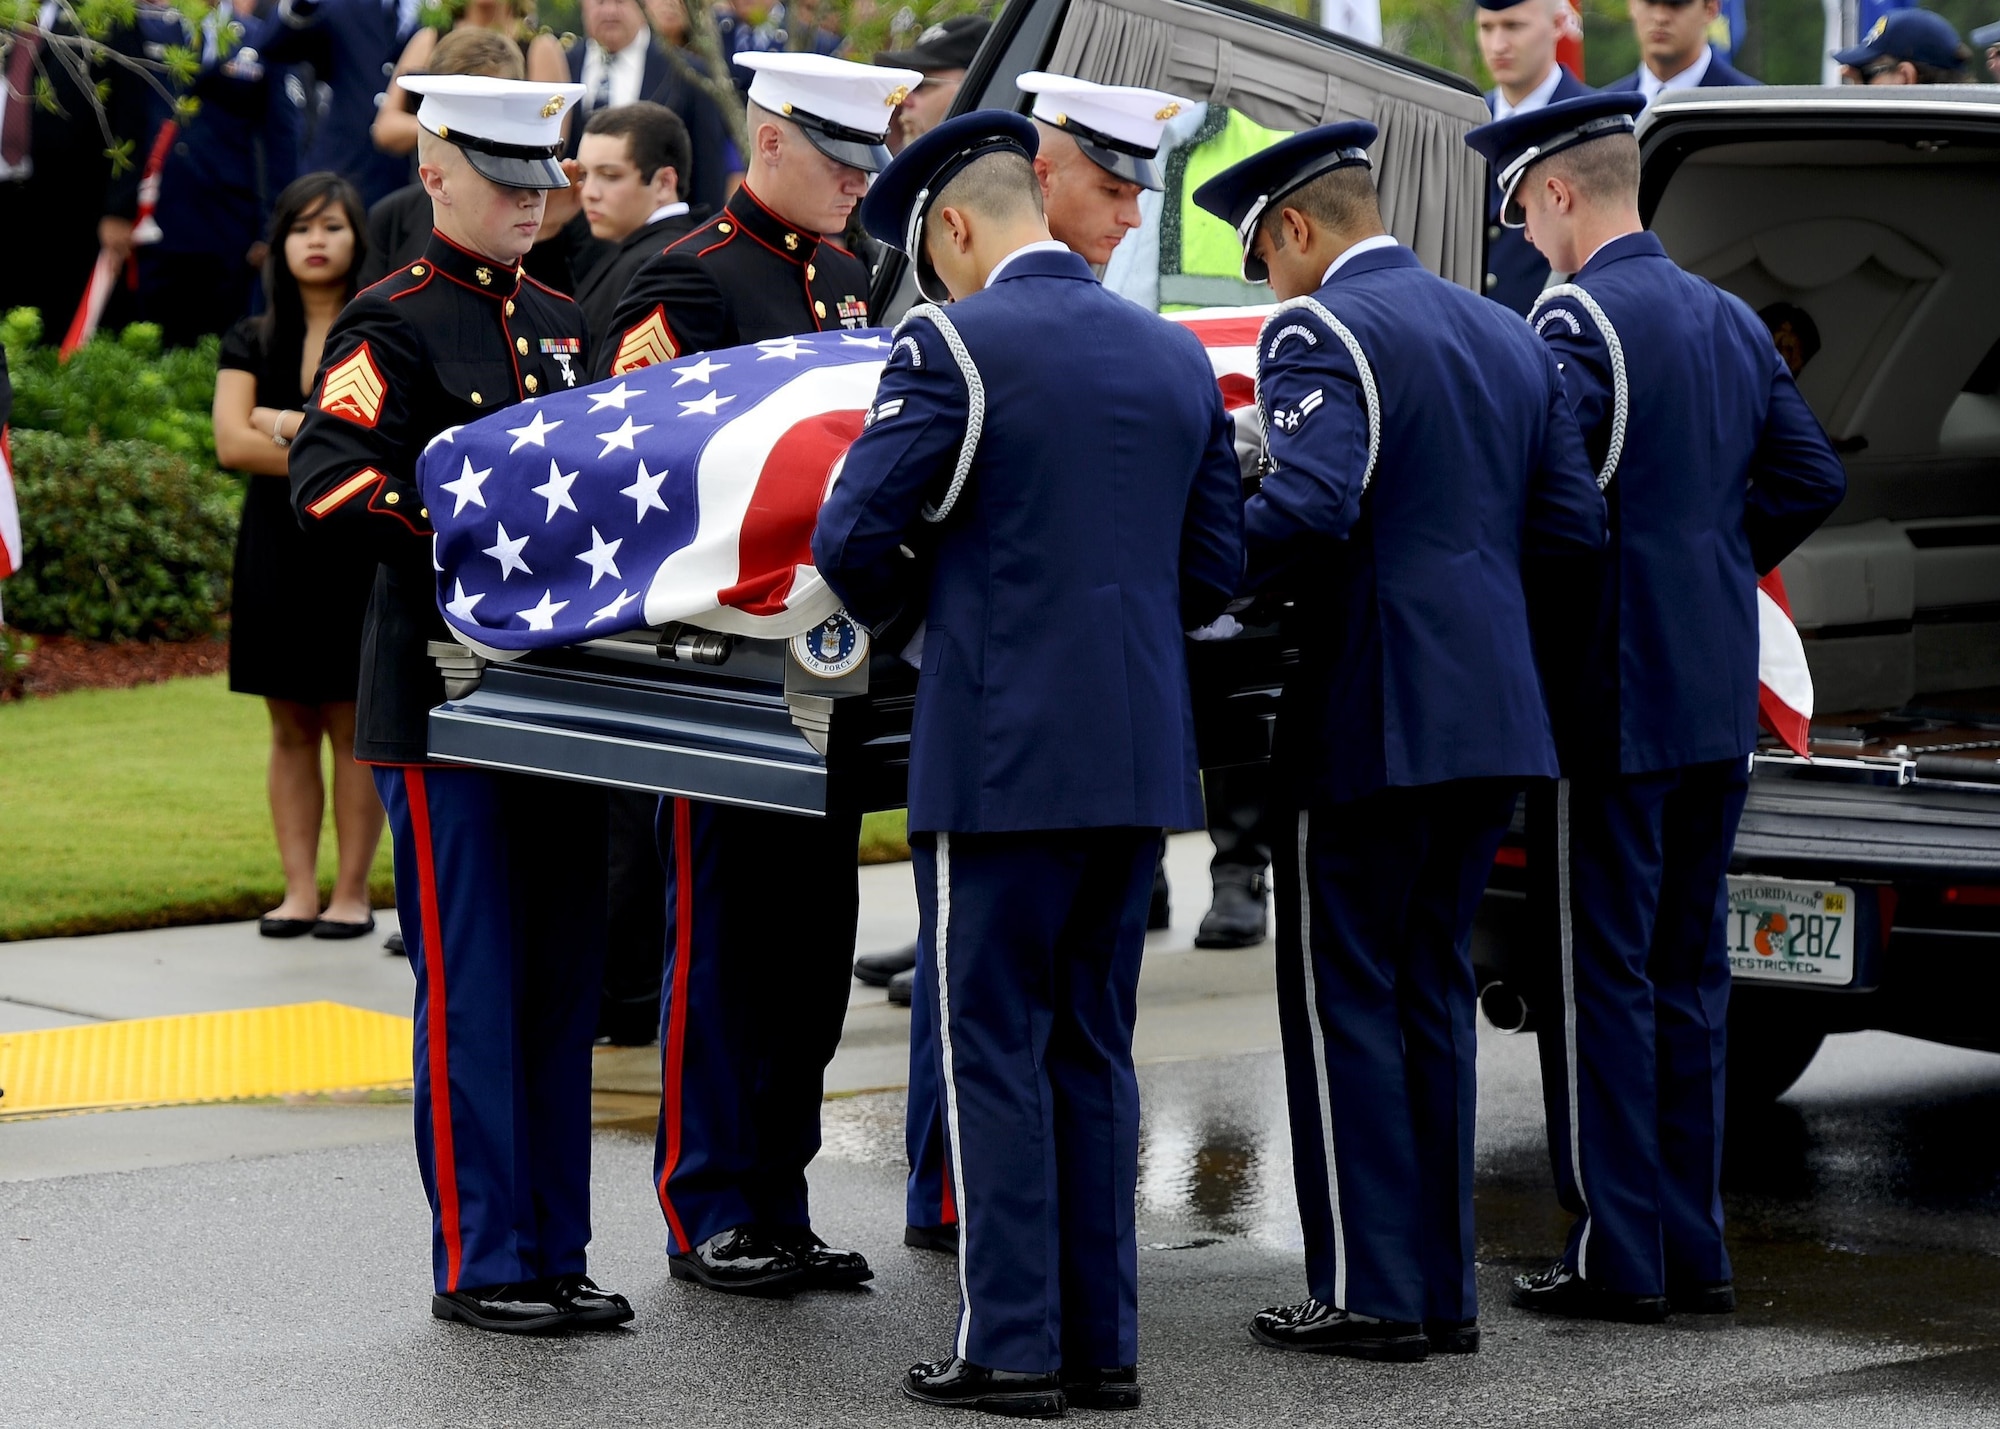 Pallbearers, made up of Airmen and Marines, lift the casket of retired U.S. Air Force Col. George “Bud” Day from his hearse during the funeral service at Barrancas National Cemetery on Naval Air Station Pensacola, Fla., Aug. 1, 2013. Day, a Medal of Honor recipient and combat pilot with service in World War II, Korea and Vietnam, passed away July 27 at the age of 88. (U.S. Air Force Photo/ Airman 1st Class Jeffrey Parkinson) 
